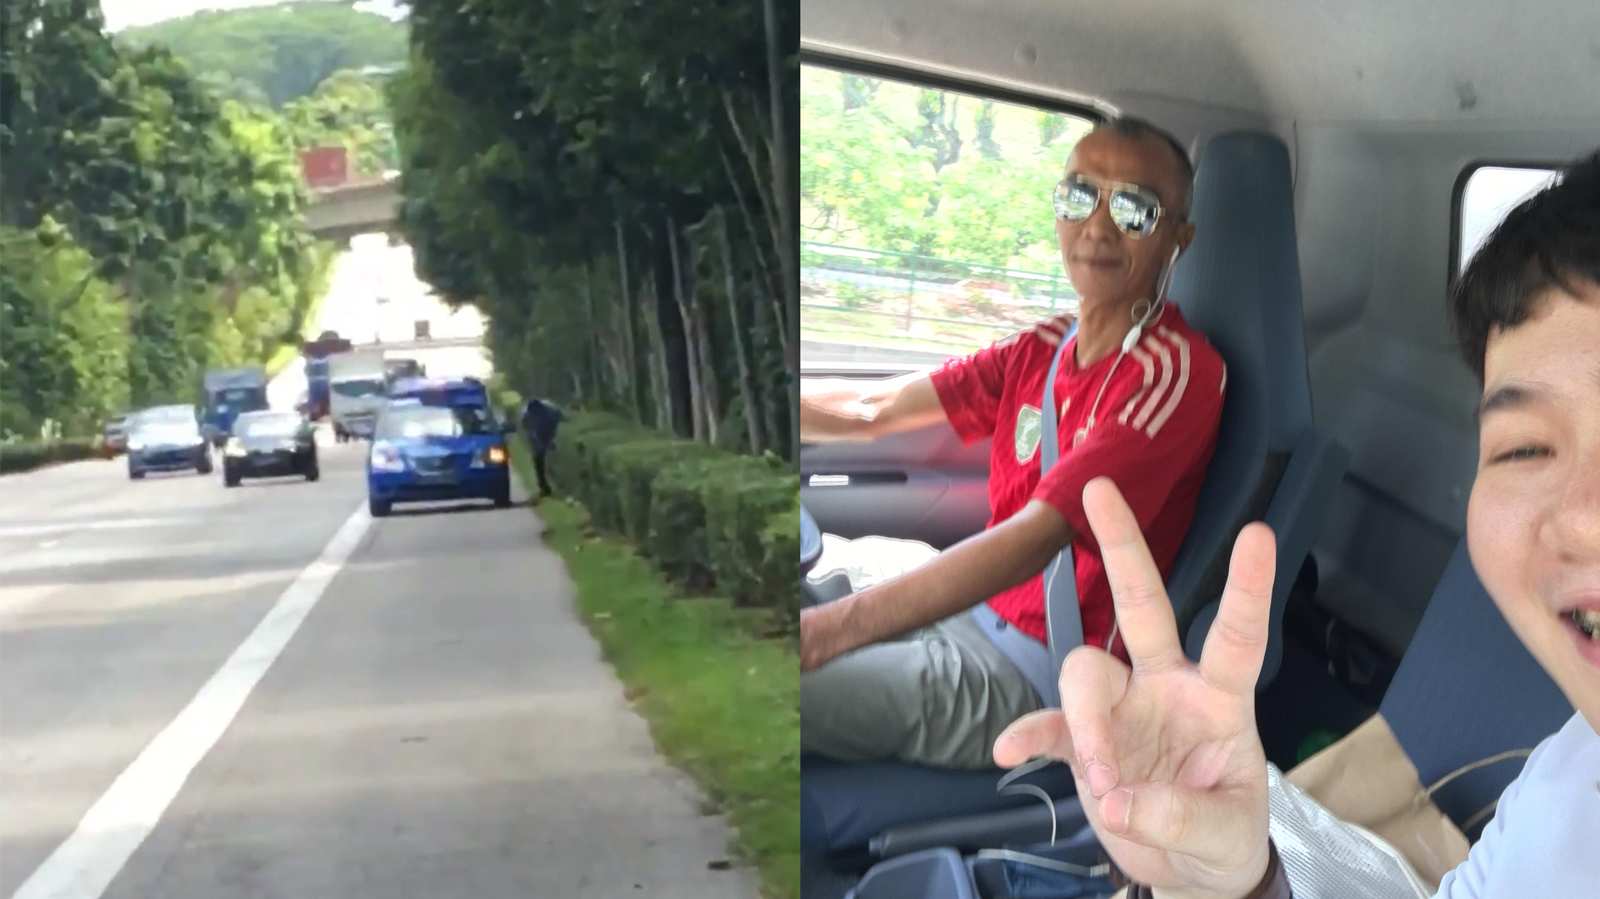 Kind lorry driver gives taxi passenger stranded on the highway a lift home